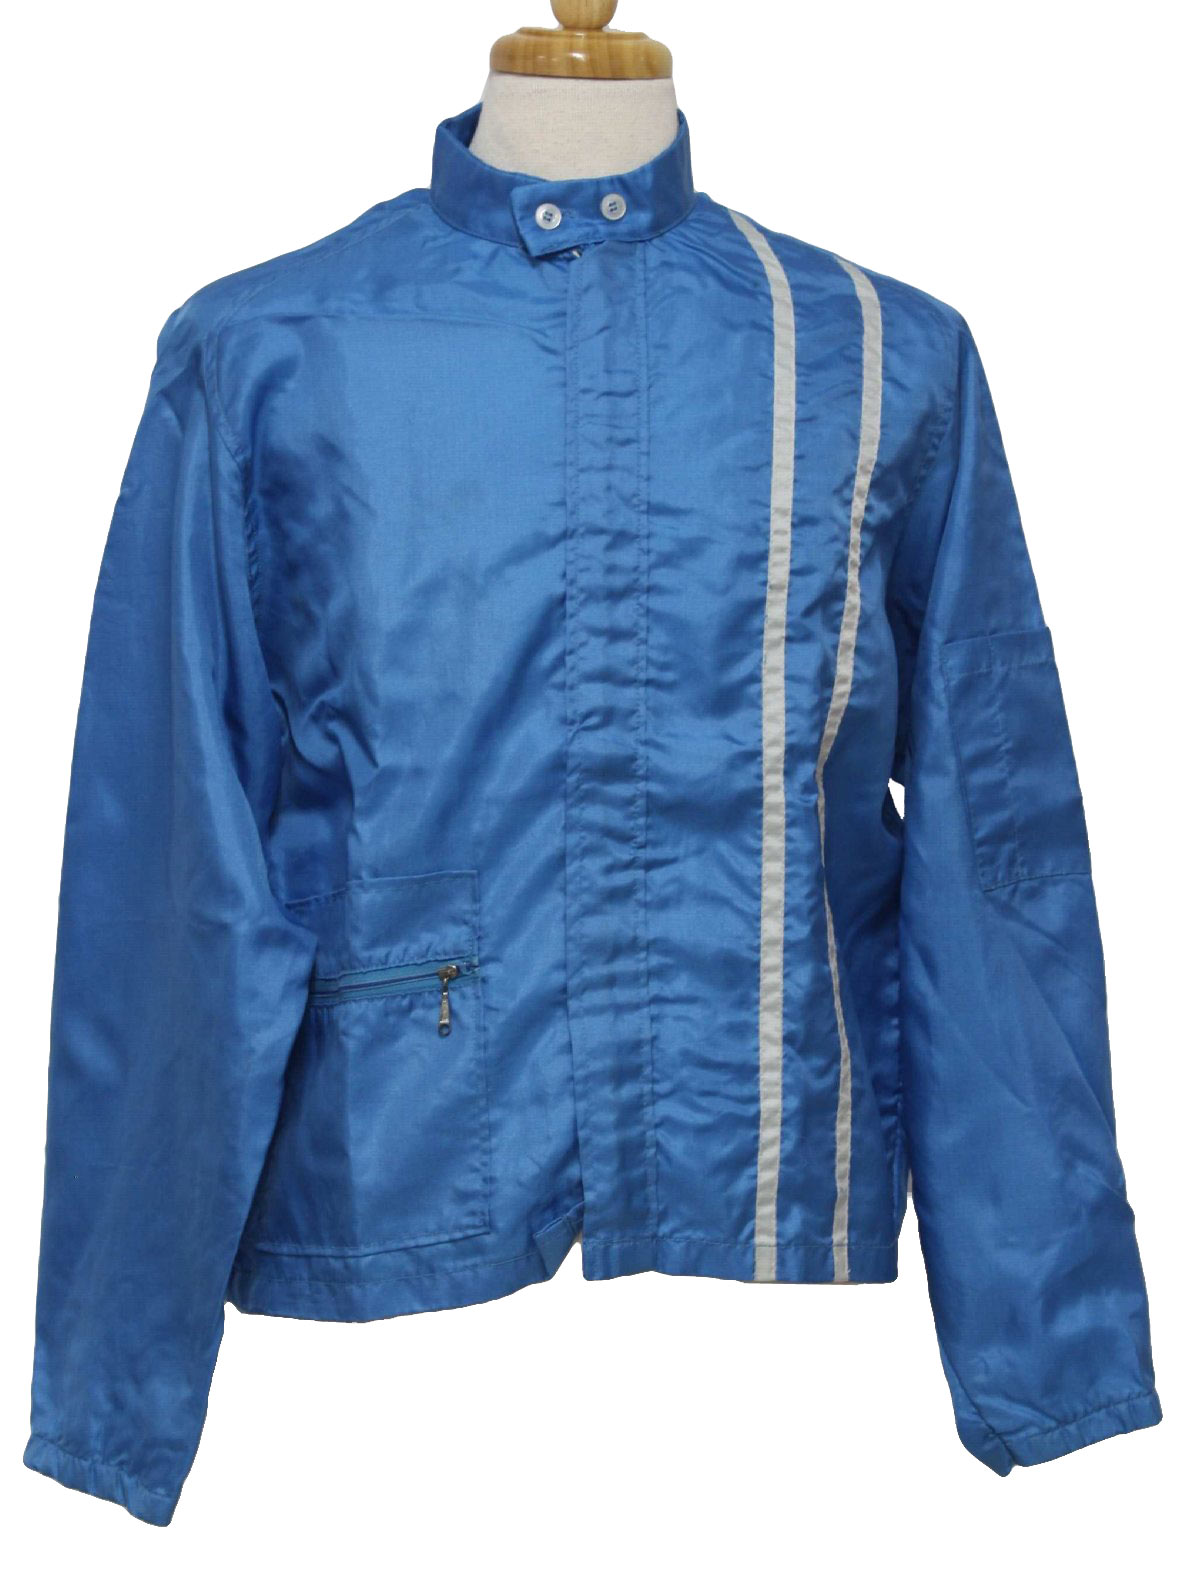 Retro Sixties Jacket: 60s -Swingster- Mens pool blue and white nylon ...